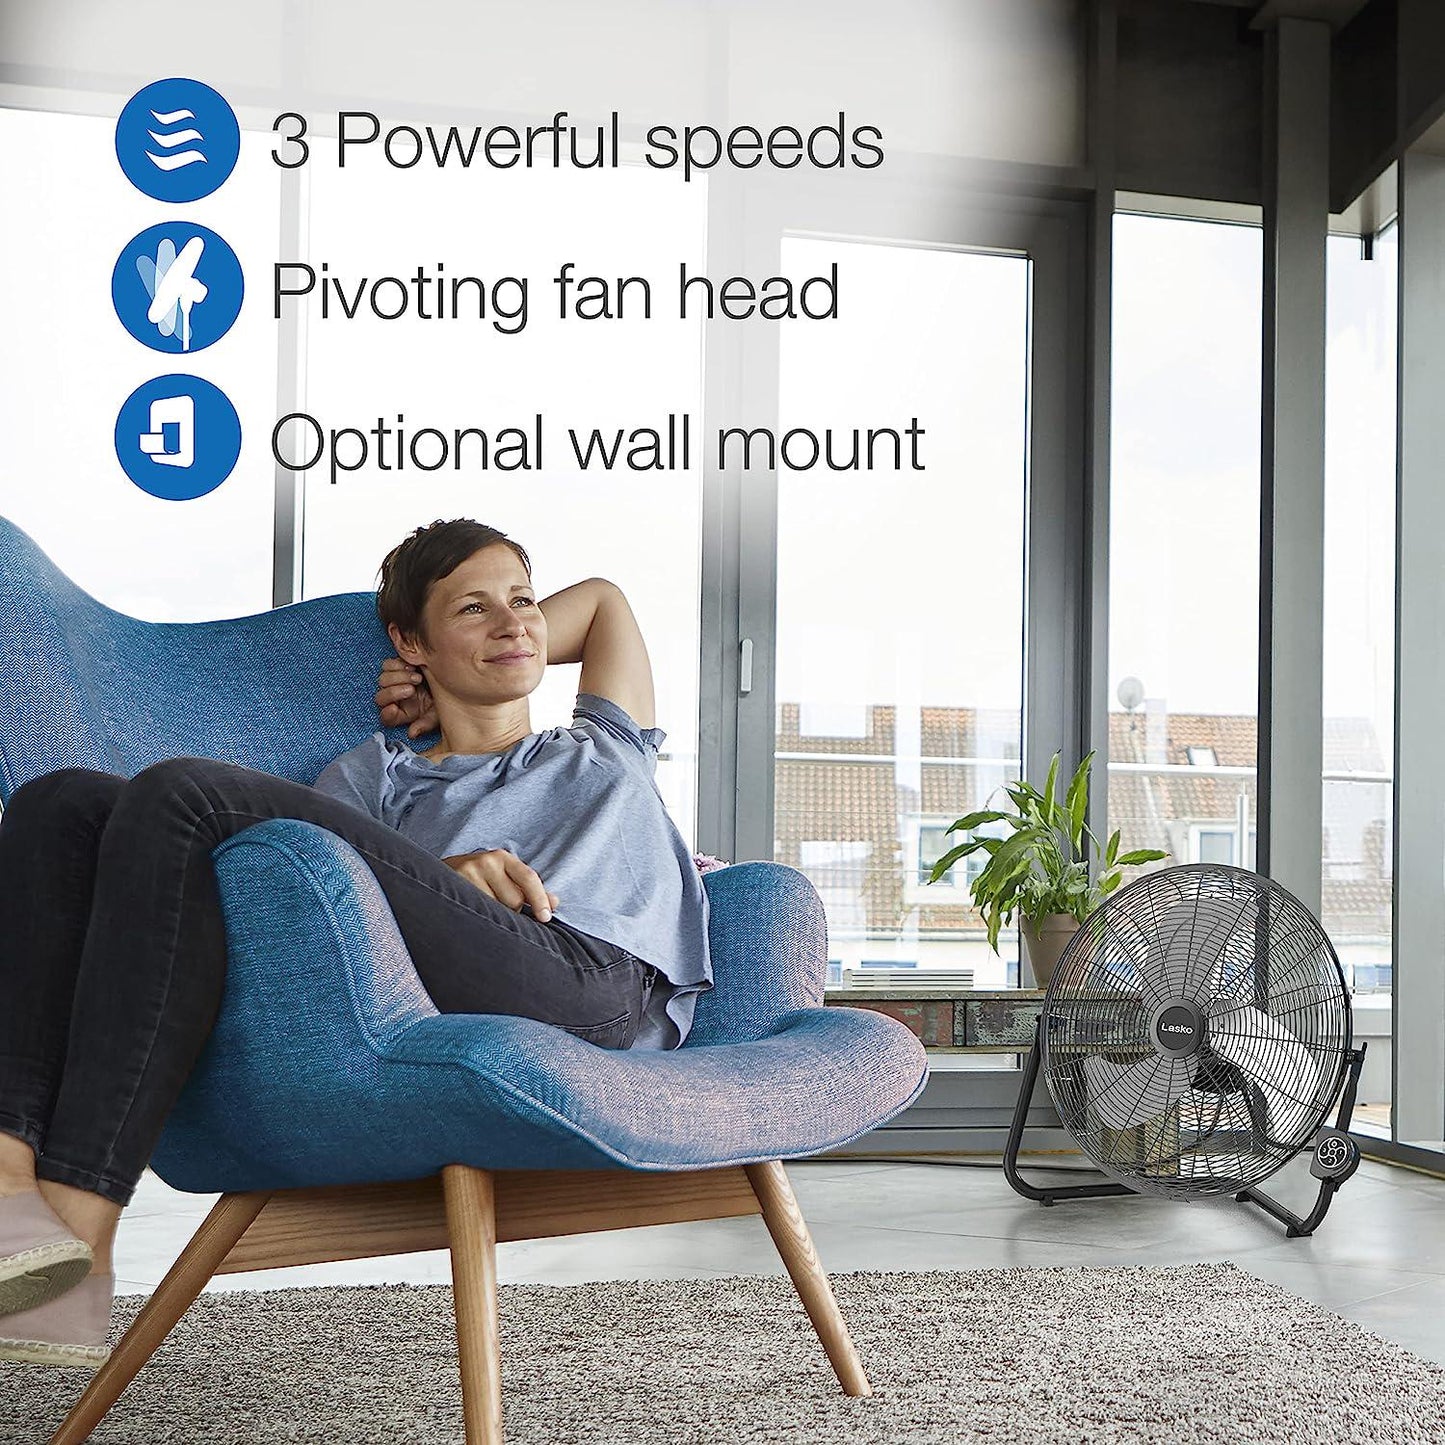 High Velocity Fan with QuickMount for Floor or Wall Mount Use, 3 Powerful Speeds, Remote Control for Garage, Shop, Attic, 20 , Black, H20660